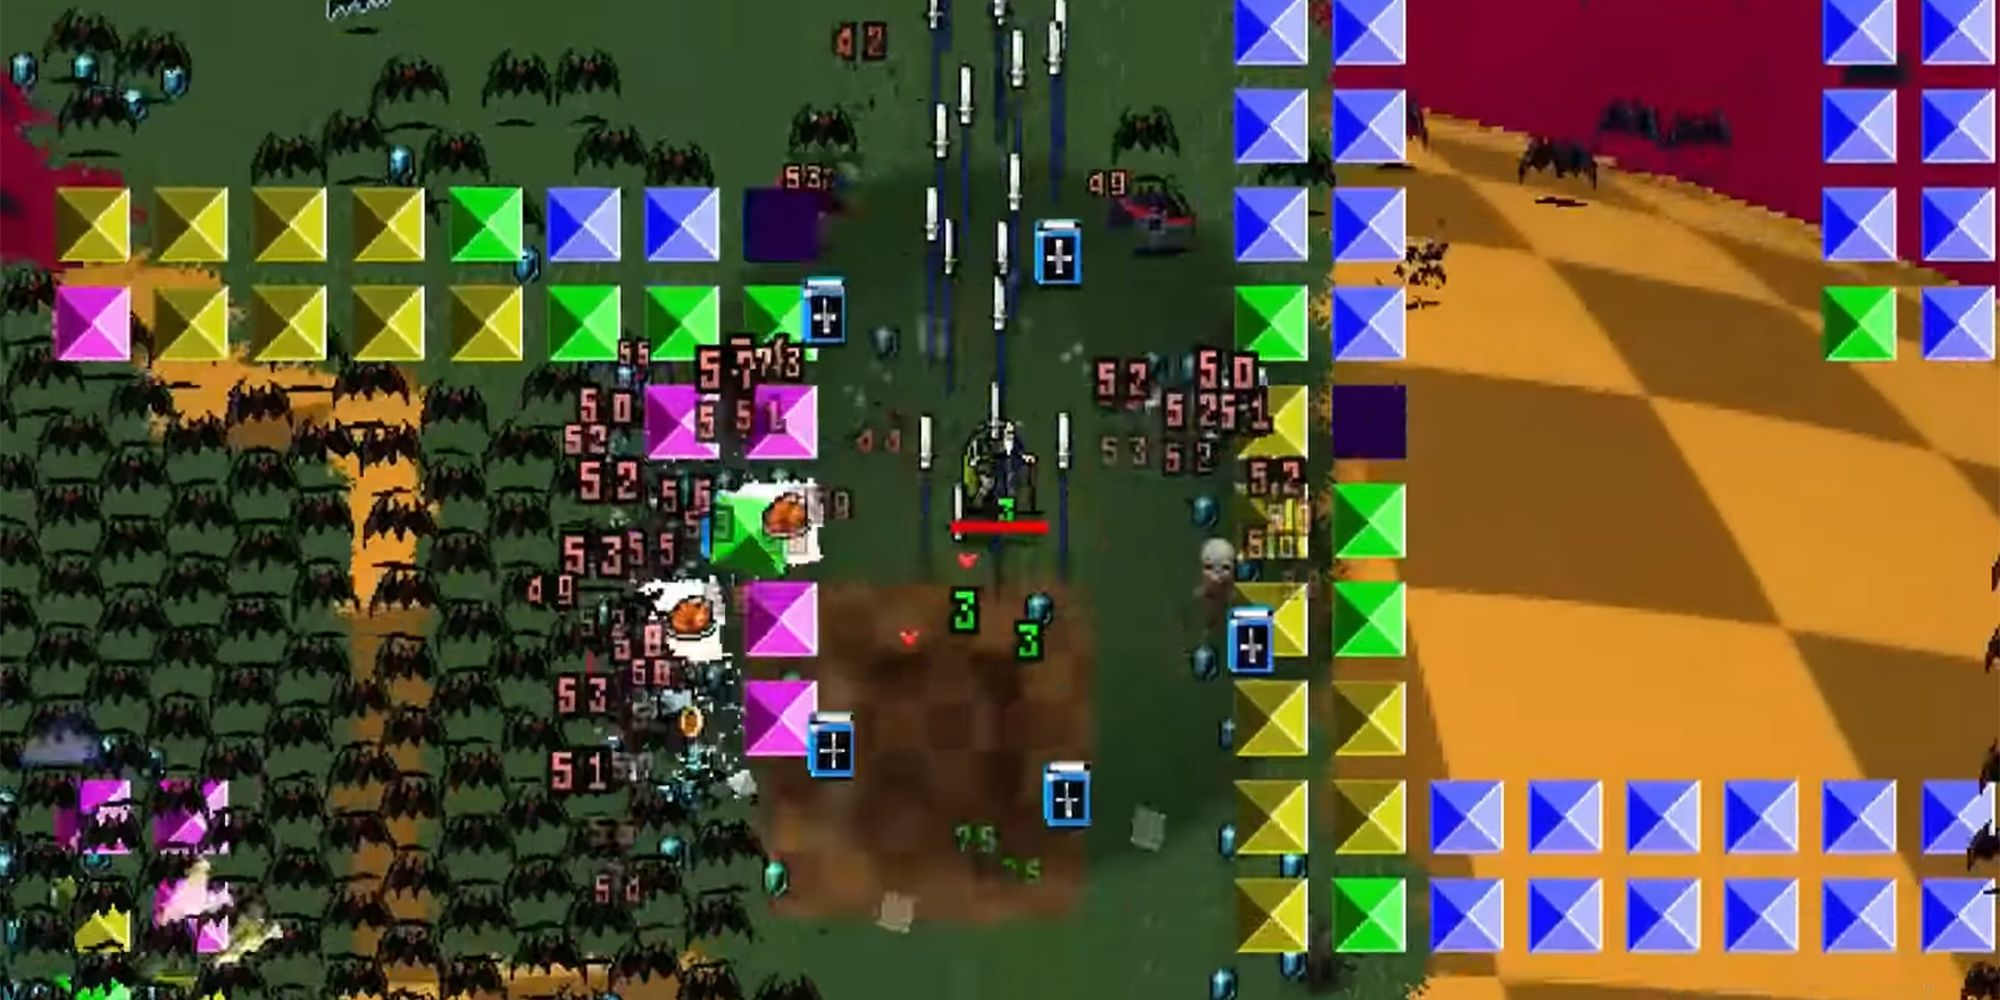 bat country map with waves of bats swarming the player and blue and yellow blocks